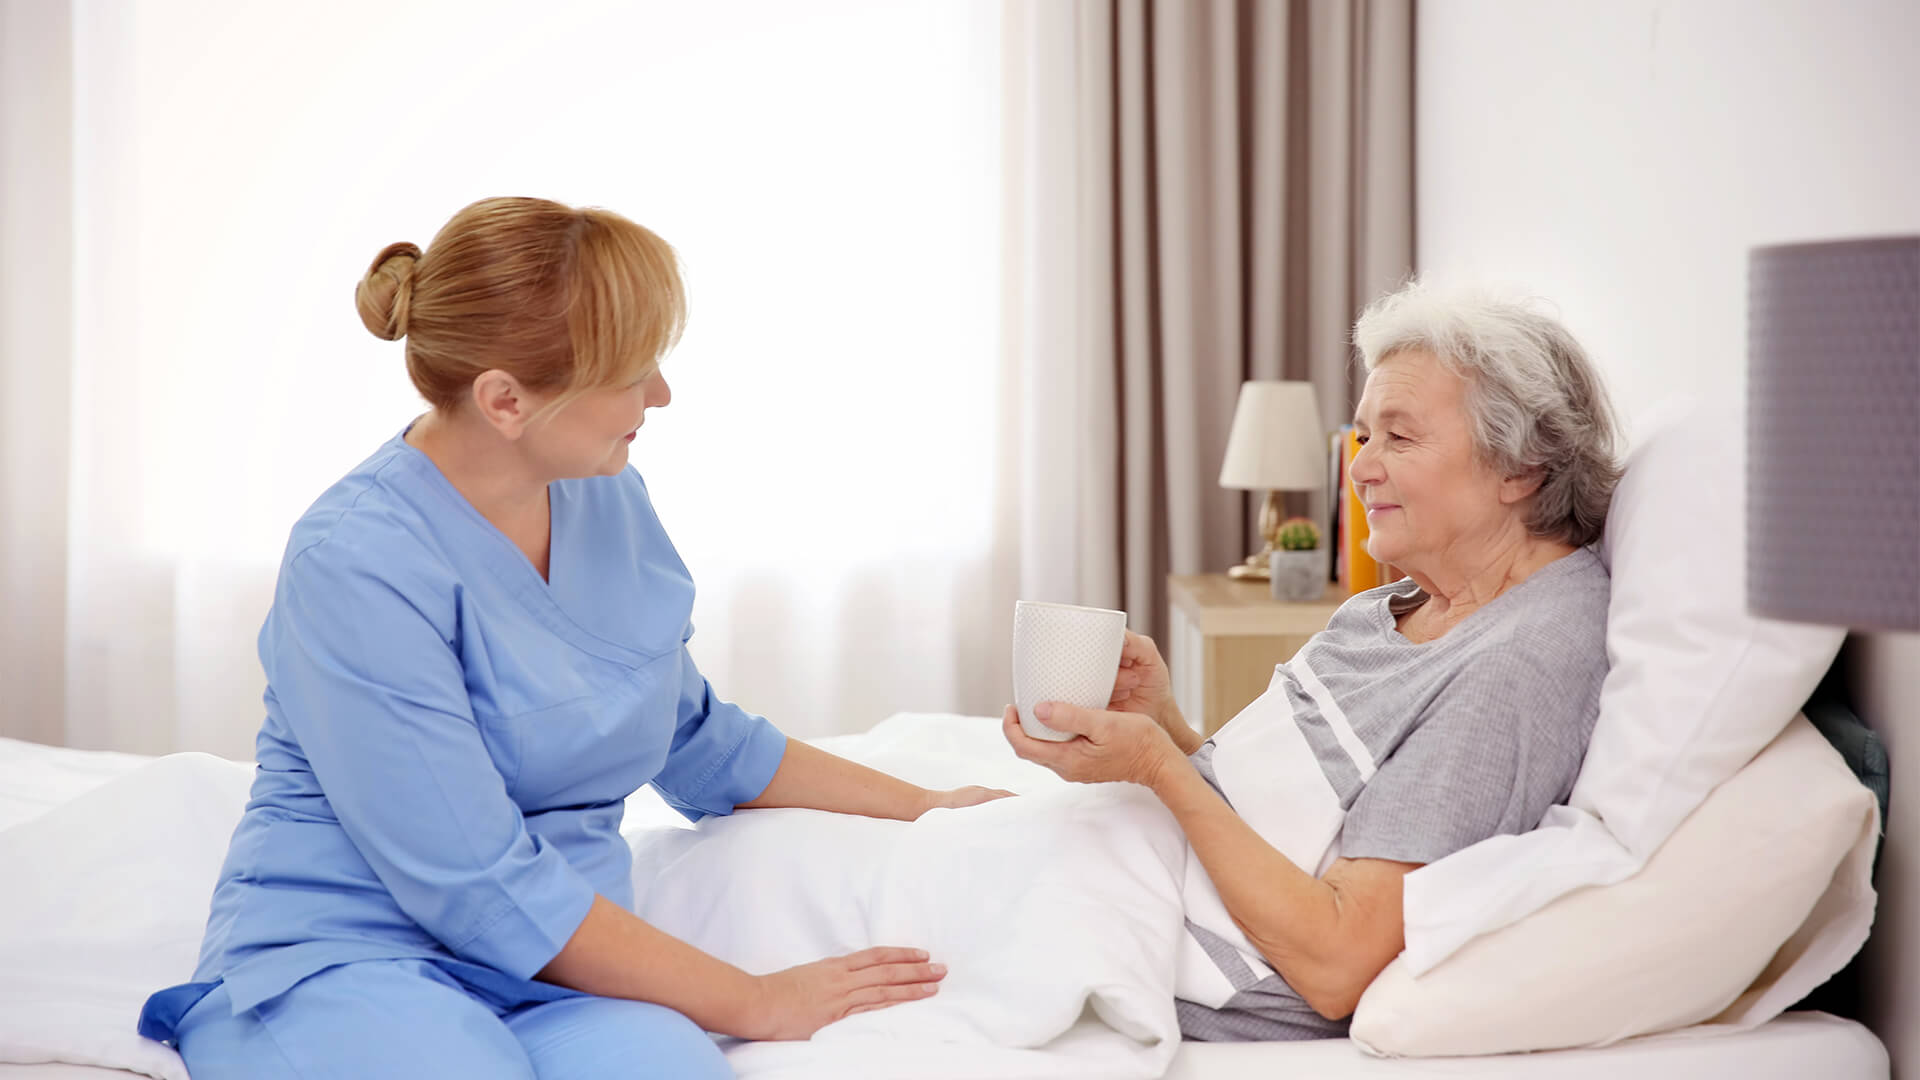 8 Tips On Choosing An In-Home Care Provider